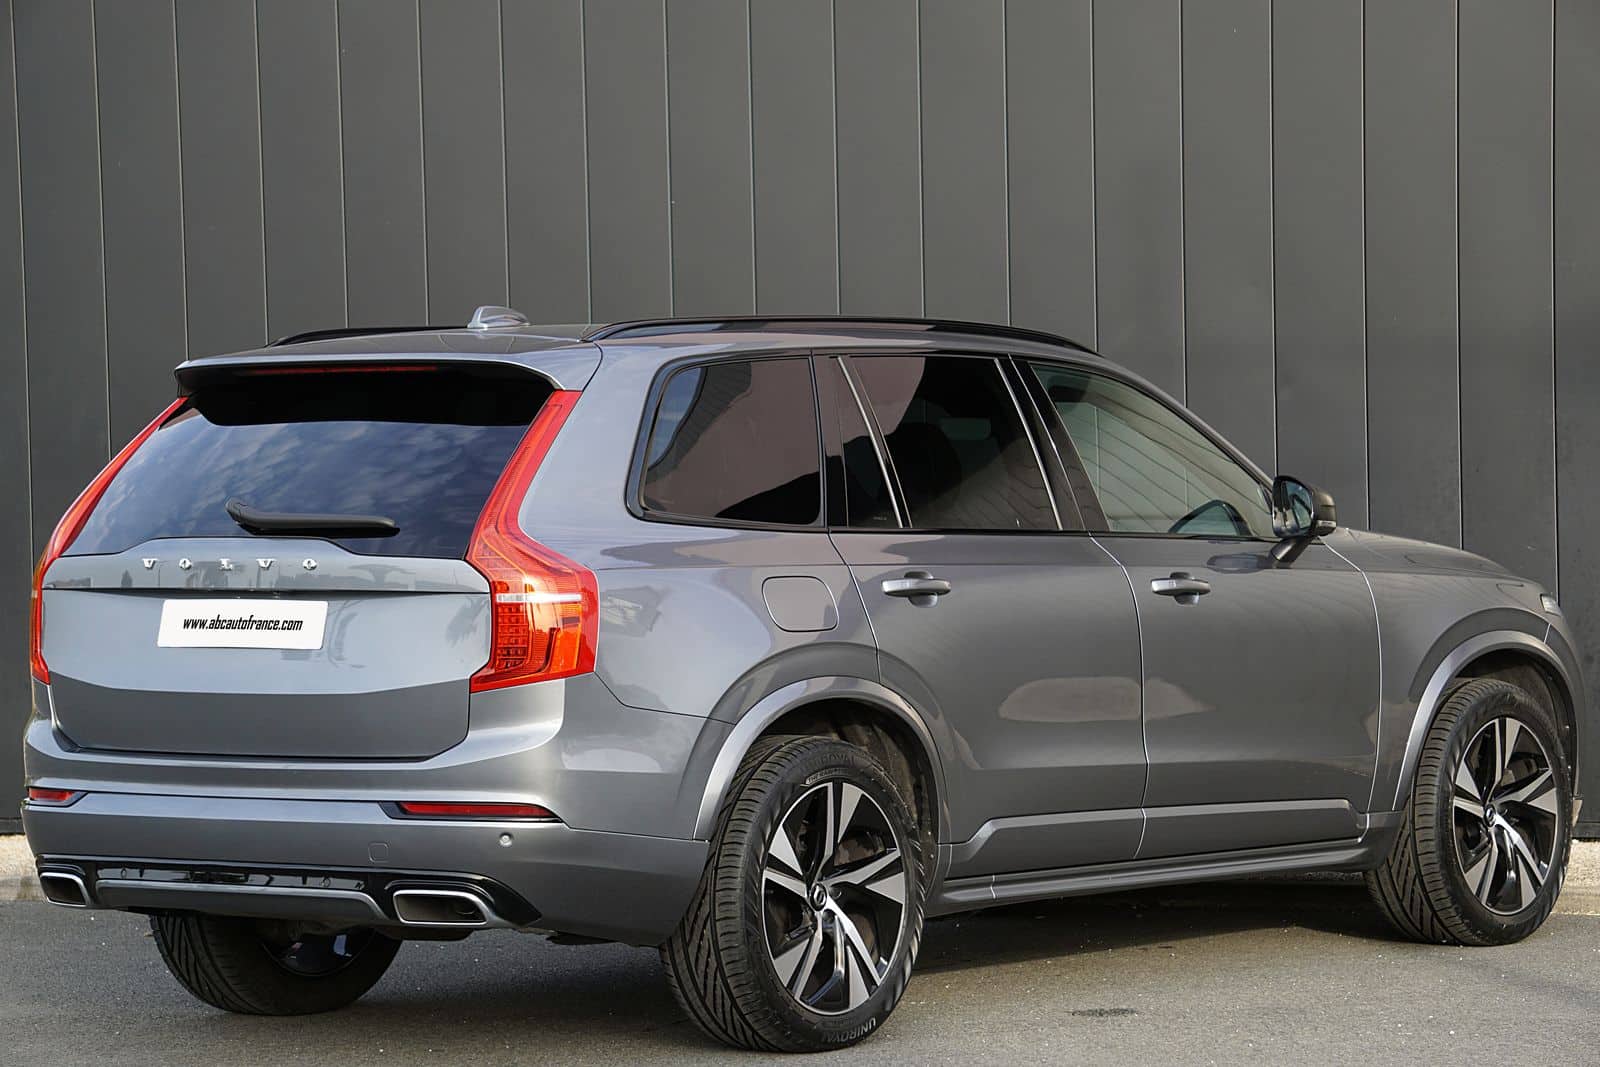 VOLVO XC90 (II) Phase II B5 AWD 235 CV R-Design Geartronic 5 places Occasion 79 abcautofrance (abc auto france) 7